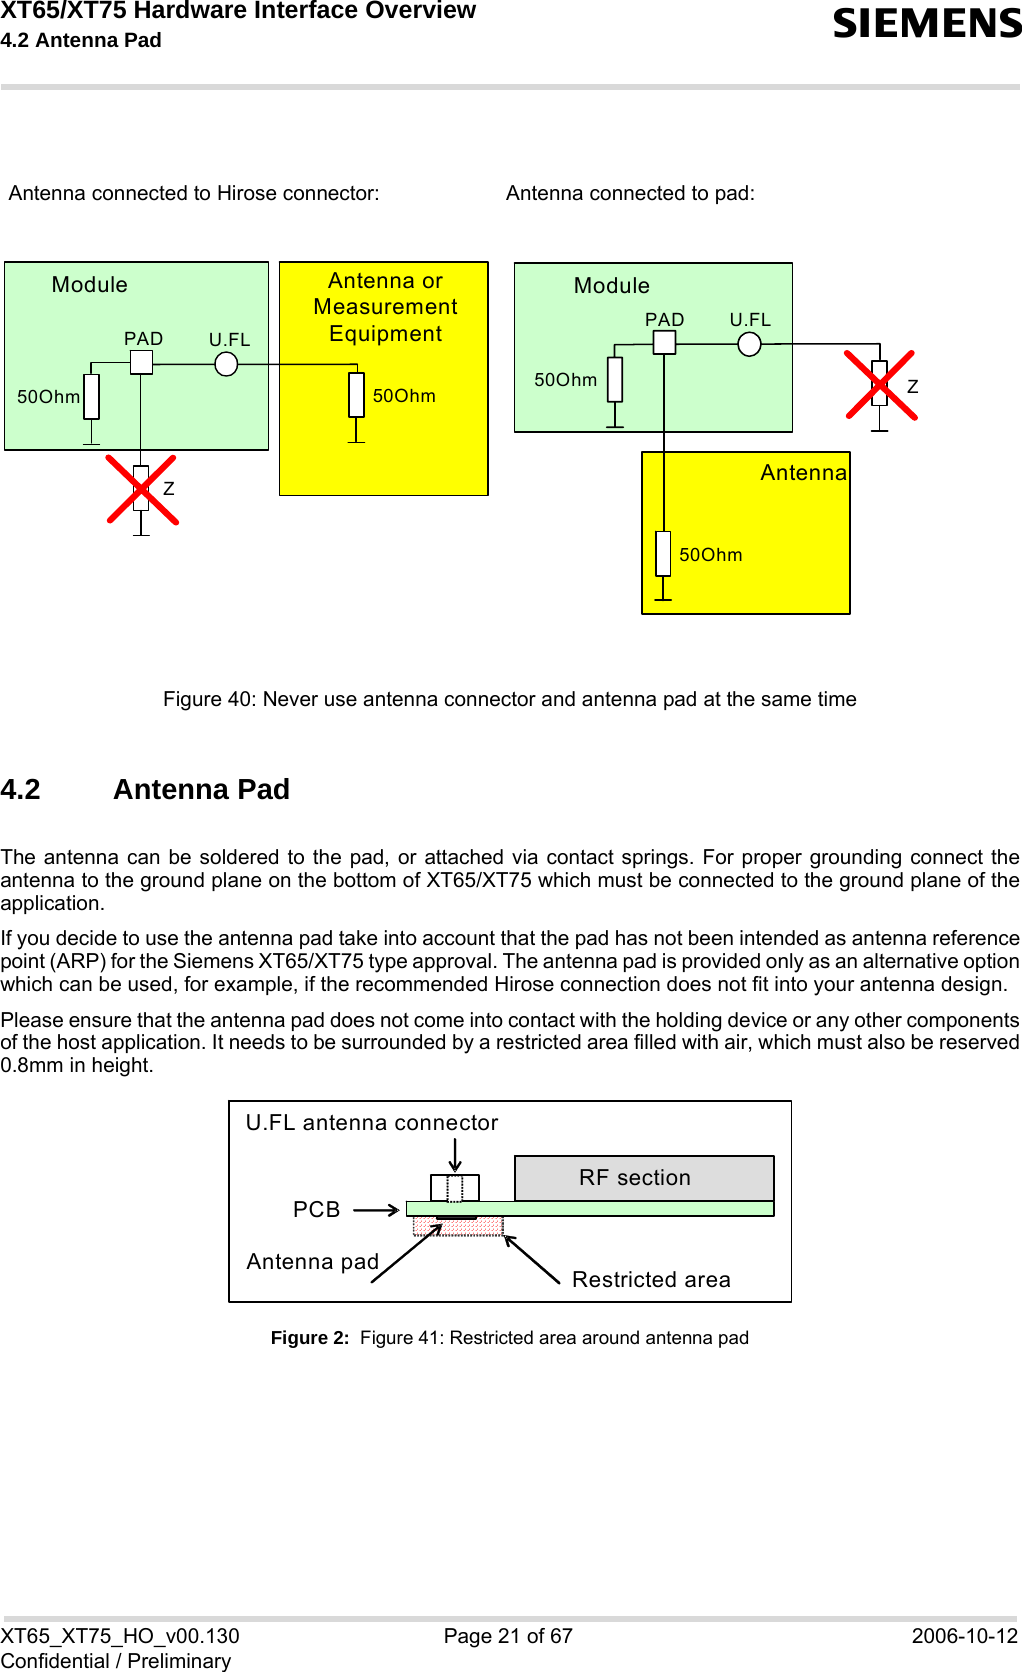 XT65/XT75 Hardware Interface Overview 4.2 Antenna Pad sXT65_XT75_HO_v00.130 Page 21 of 67 2006-10-12Confidential / PreliminaryFigure 40: Never use antenna connector and antenna pad at the same time4.2 Antenna PadThe antenna can be soldered to the pad, or attached via contact springs. For proper grounding connect theantenna to the ground plane on the bottom of XT65/XT75 which must be connected to the ground plane of theapplication.If you decide to use the antenna pad take into account that the pad has not been intended as antenna referencepoint (ARP) for the Siemens XT65/XT75 type approval. The antenna pad is provided only as an alternative optionwhich can be used, for example, if the recommended Hirose connection does not fit into your antenna design.Please ensure that the antenna pad does not come into contact with the holding device or any other componentsof the host application. It needs to be surrounded by a restricted area filled with air, which must also be reserved0.8mm in height.Figure 2:  Figure 41: Restricted area around antenna padAntenna connected to Hirose connector:  Antenna connected to pad:  Module Antenna or Measurement Equipment 50Ohm 50Ohm U.FL  ZPAD  Module Antenna  50Ohm 50Ohm  U.FL   PAD  Z  PCB U.FL antenna connector RF section Antenna pad Restricted area 